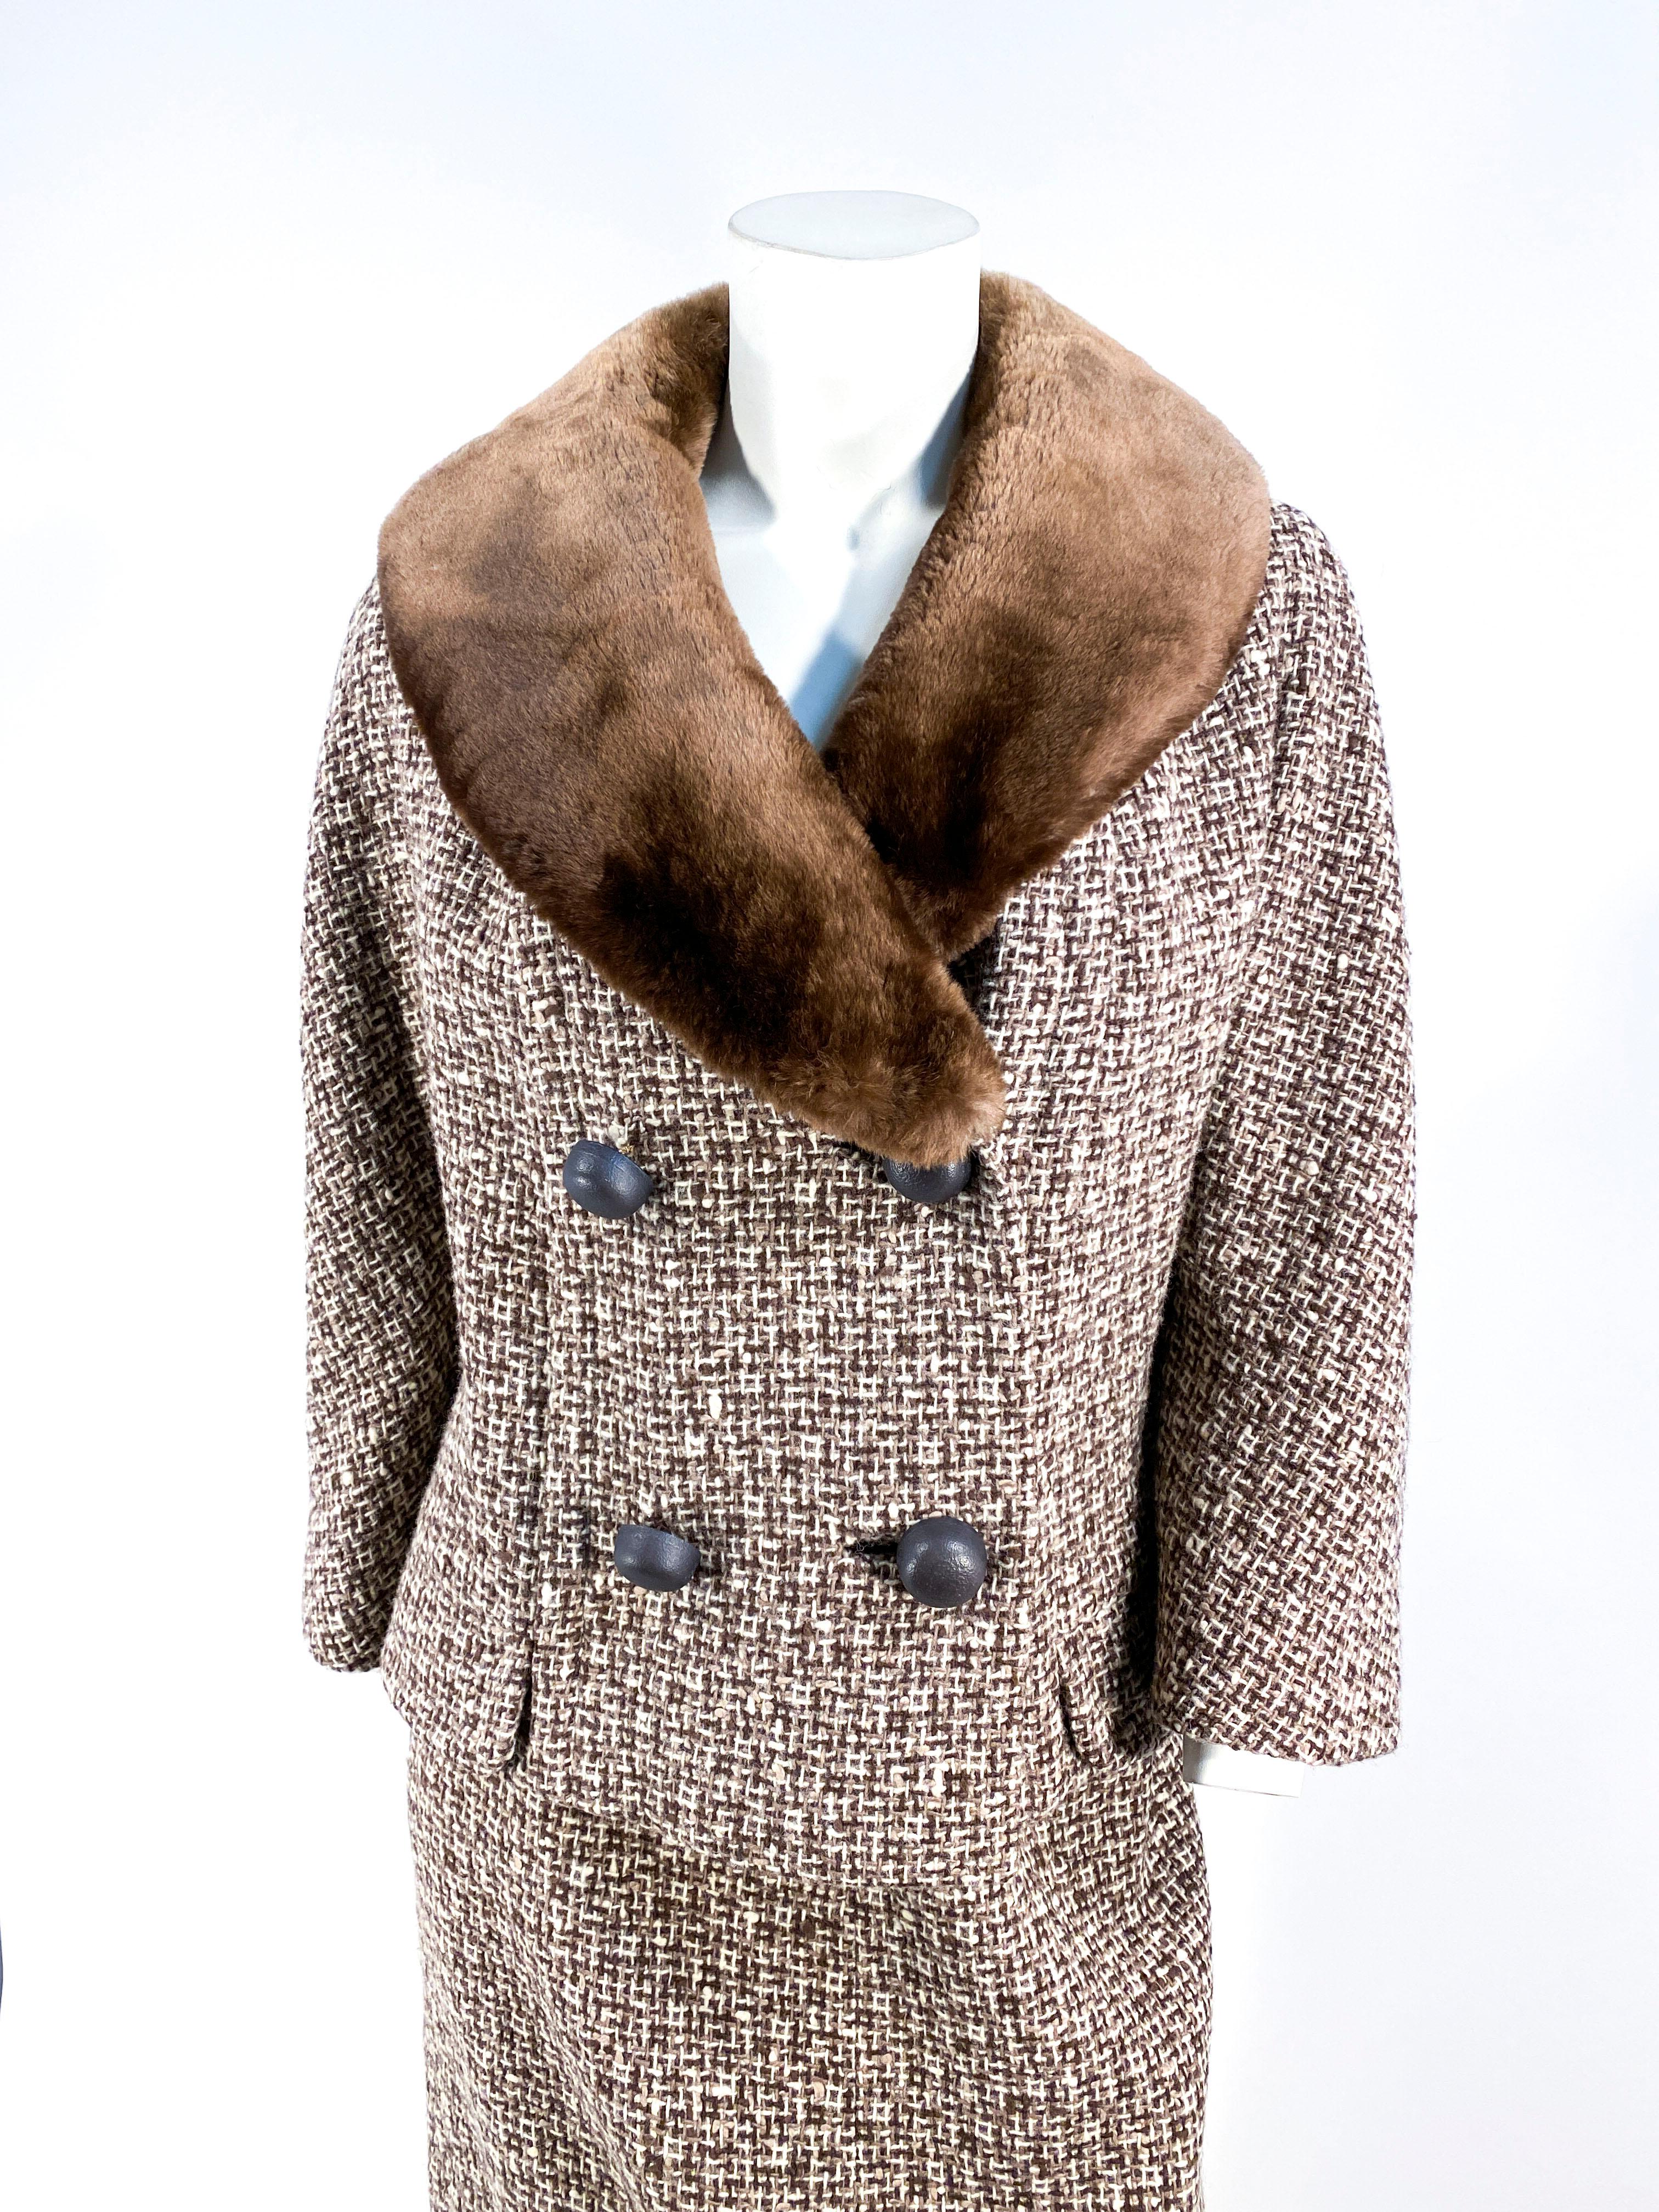 1960s tweed wool suit featuring a weave in multi tones of brown, cream, and chocolate. The double breasted jacket of the suit has a cocoa brown sheared mink shawl collar that is plush and luxurious to the touch. In addition, the face of the jacket